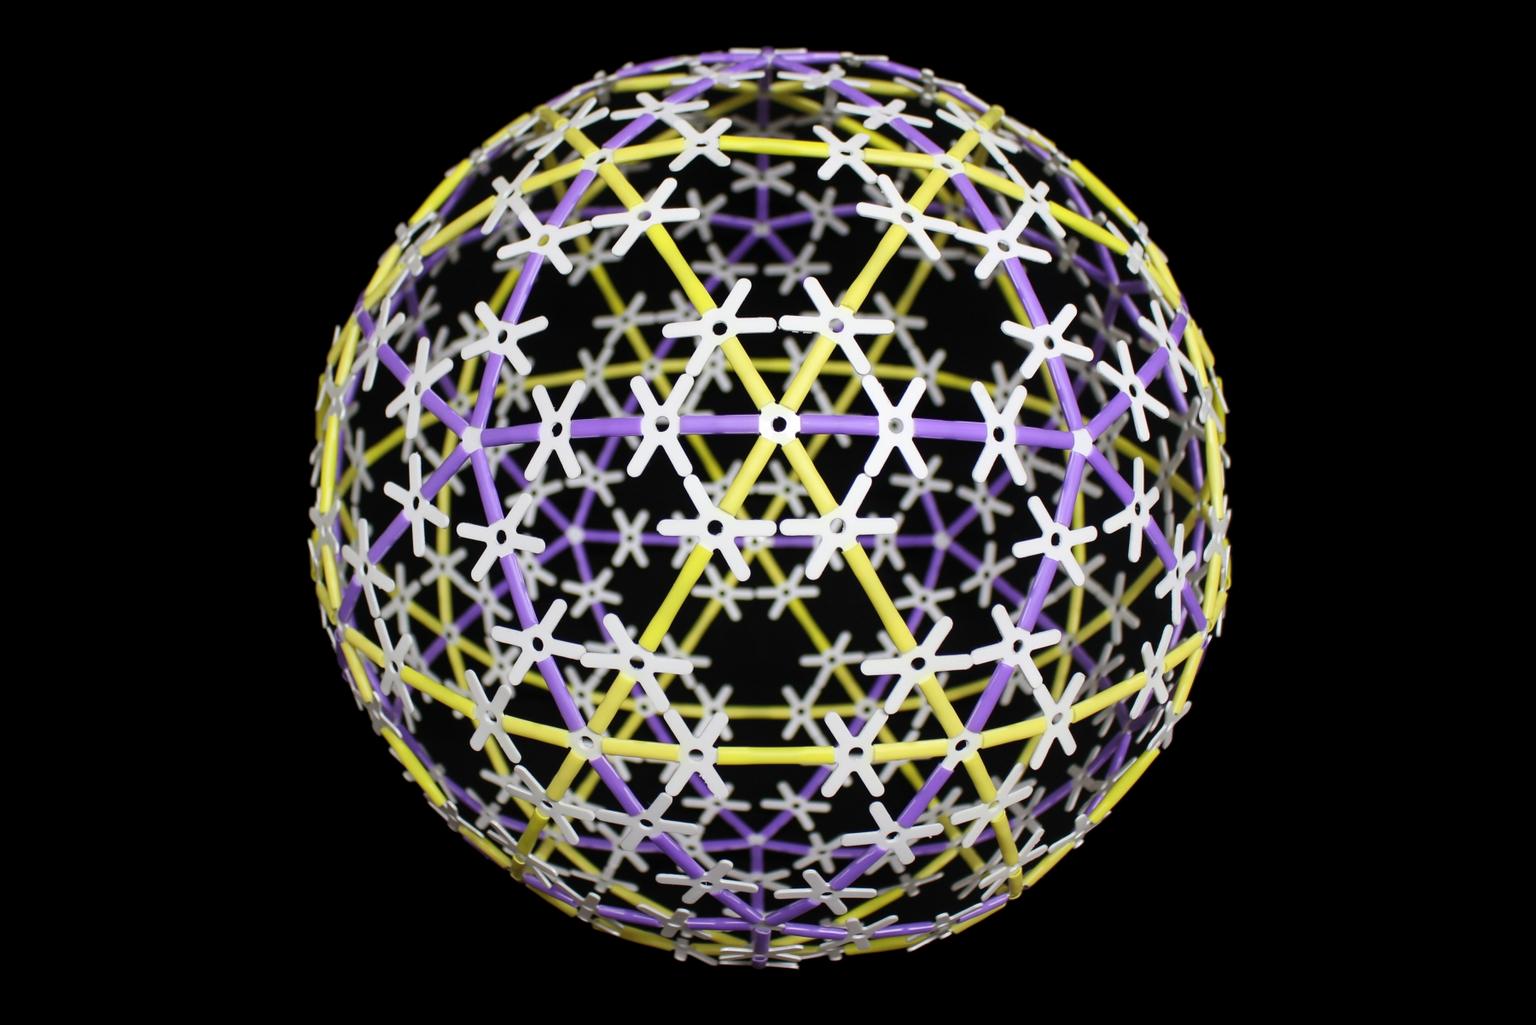 Image for entry 'Divided icosahedron filled with healing for mankind'